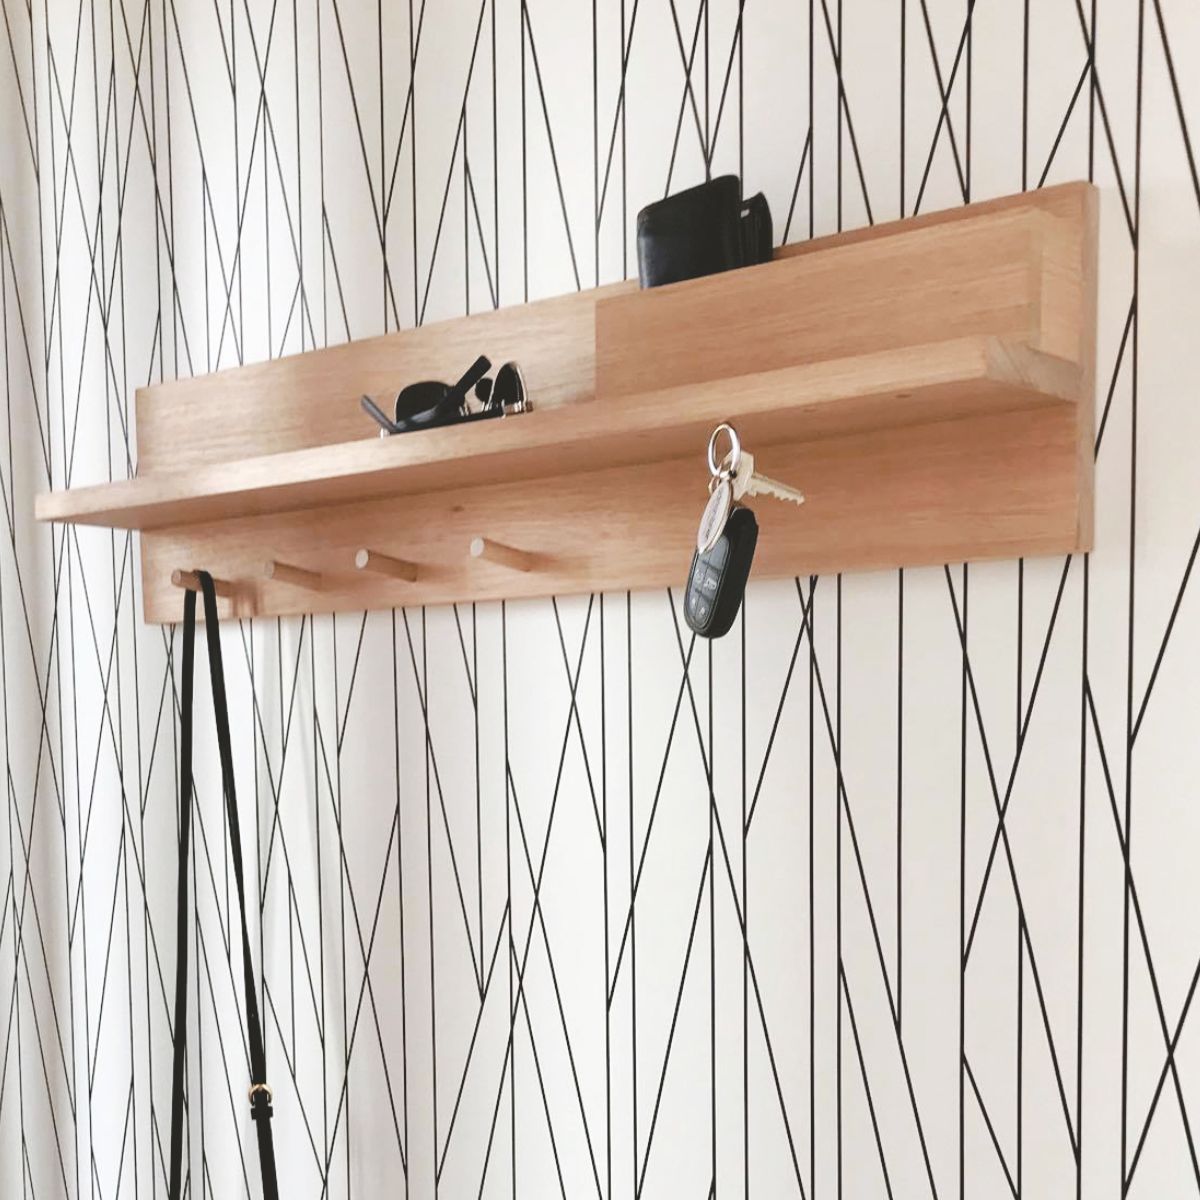 Entryway Shelf with mail holder, coat pegs and magnetic key holders on a wall